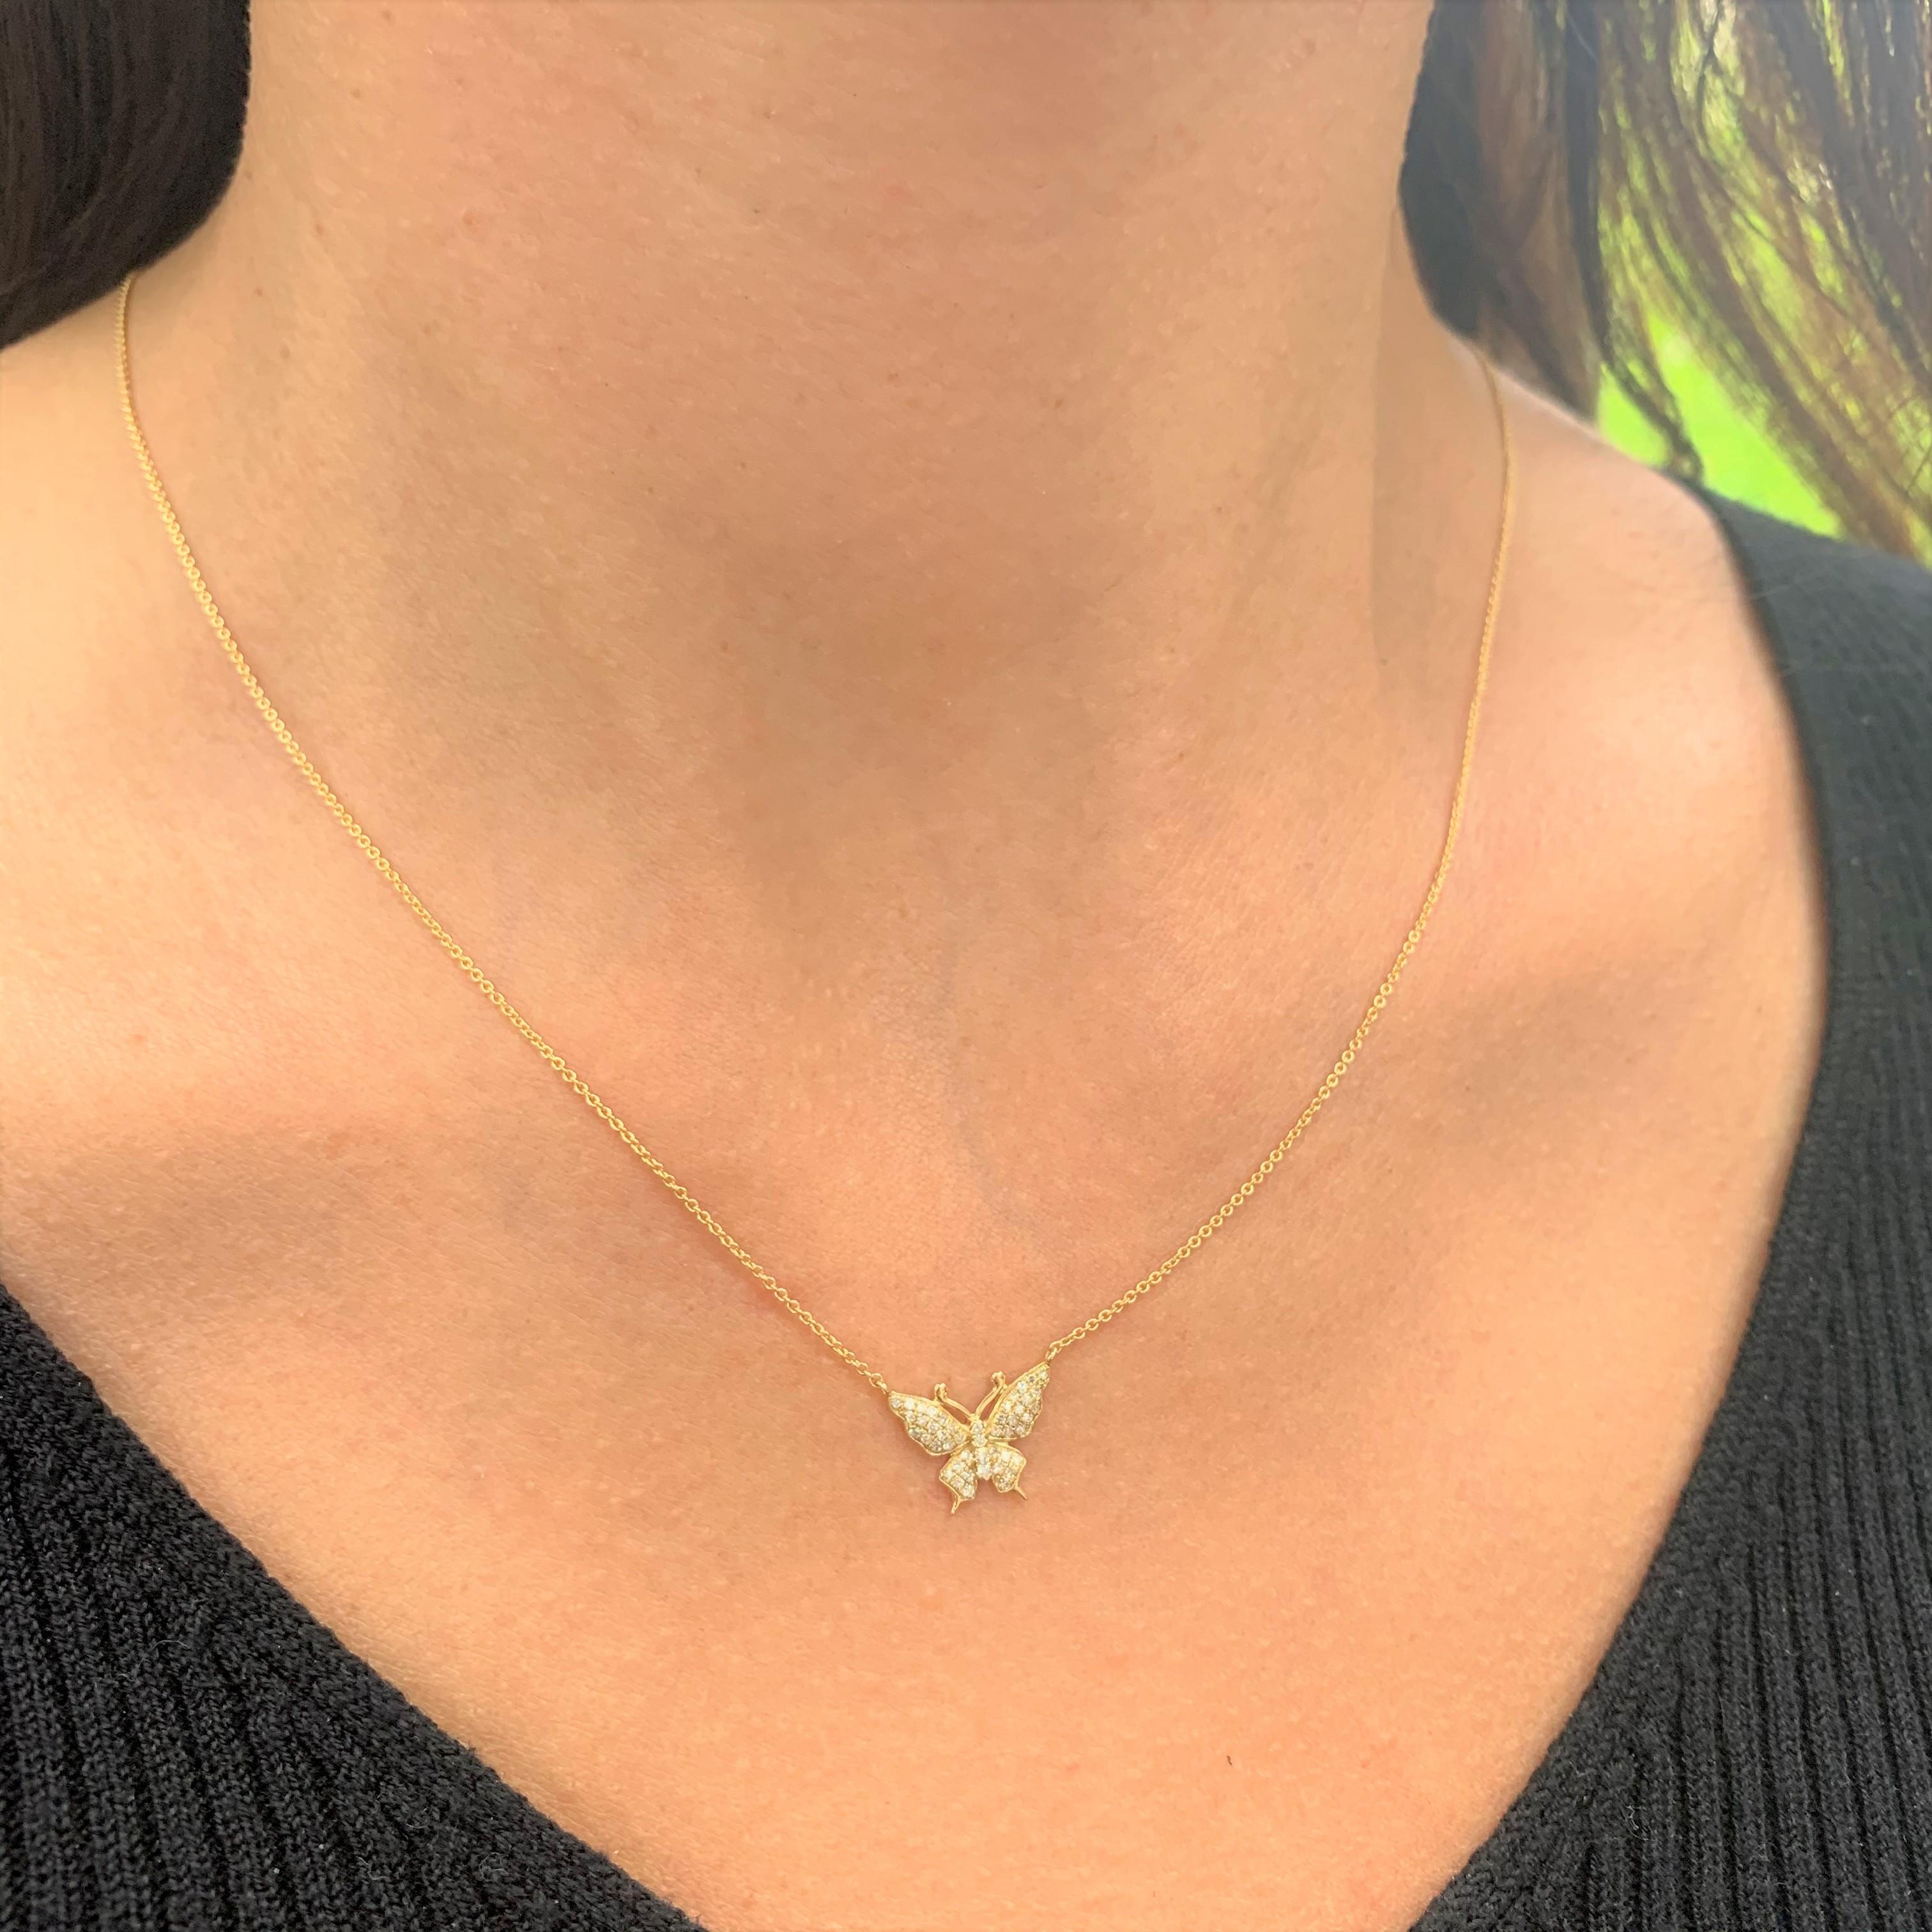 Fluttery diamond wings create an almost magical sparkle on this whimsical butterfly pendant necklace. This diamond necklace features 0.16 ct of round diamonds, pavé-set in a heart shape made of 14k yellow gold, with a matching cable chain necklace. 